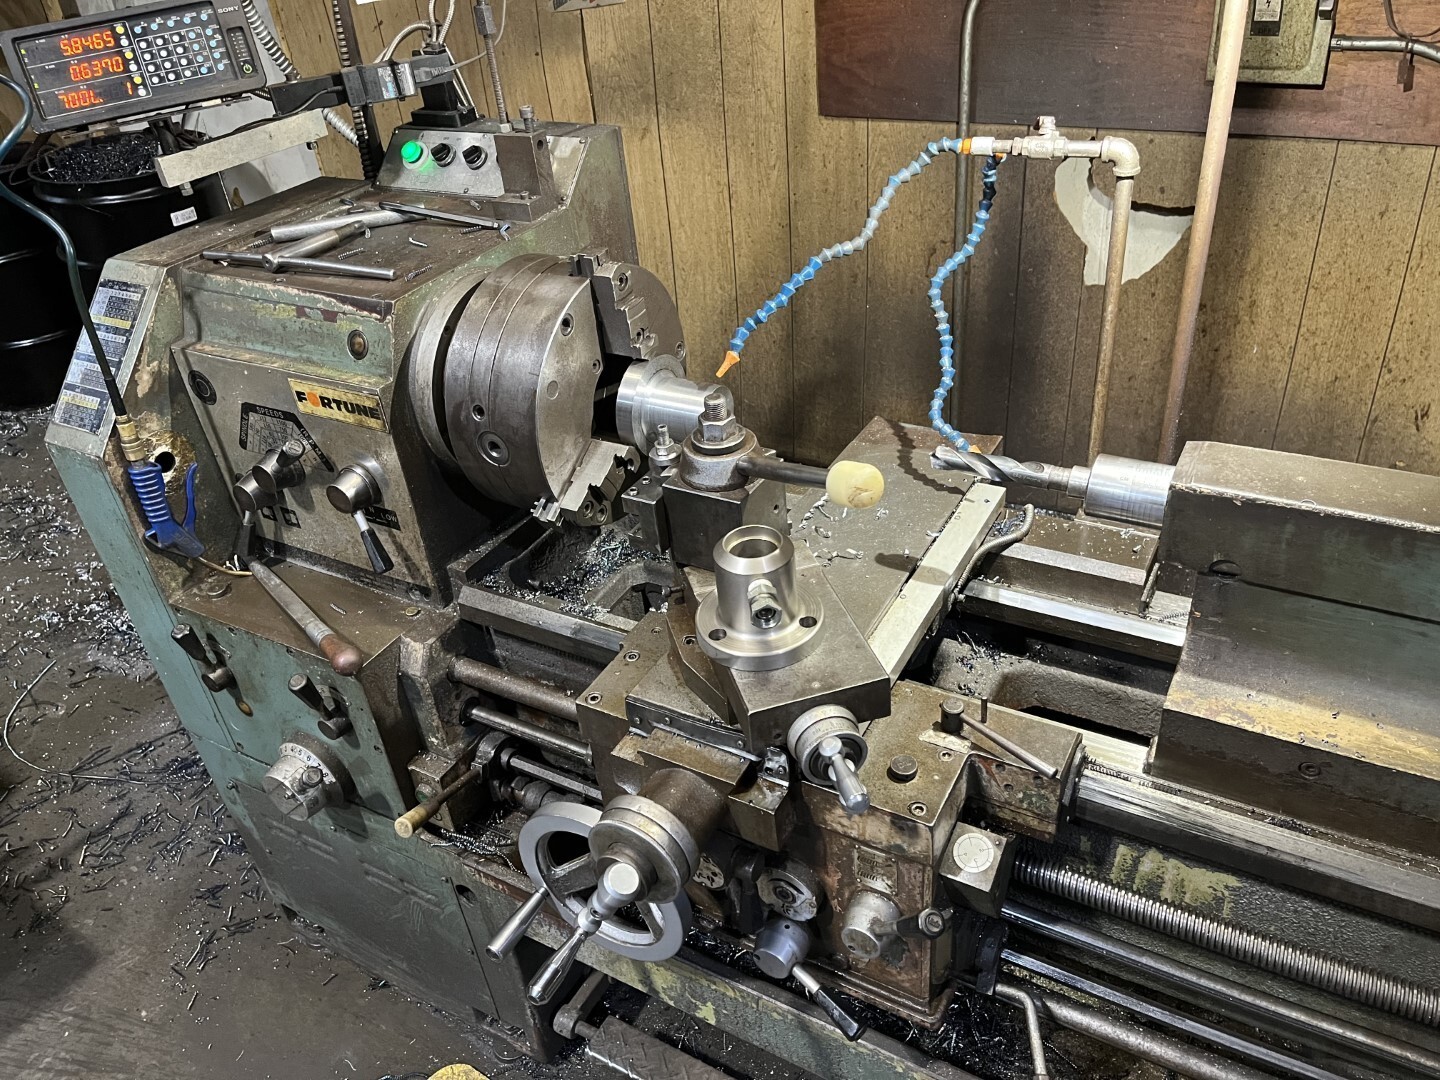 FORTUNE s2040 Engine Lathes | 520 Machinery Sales LLC